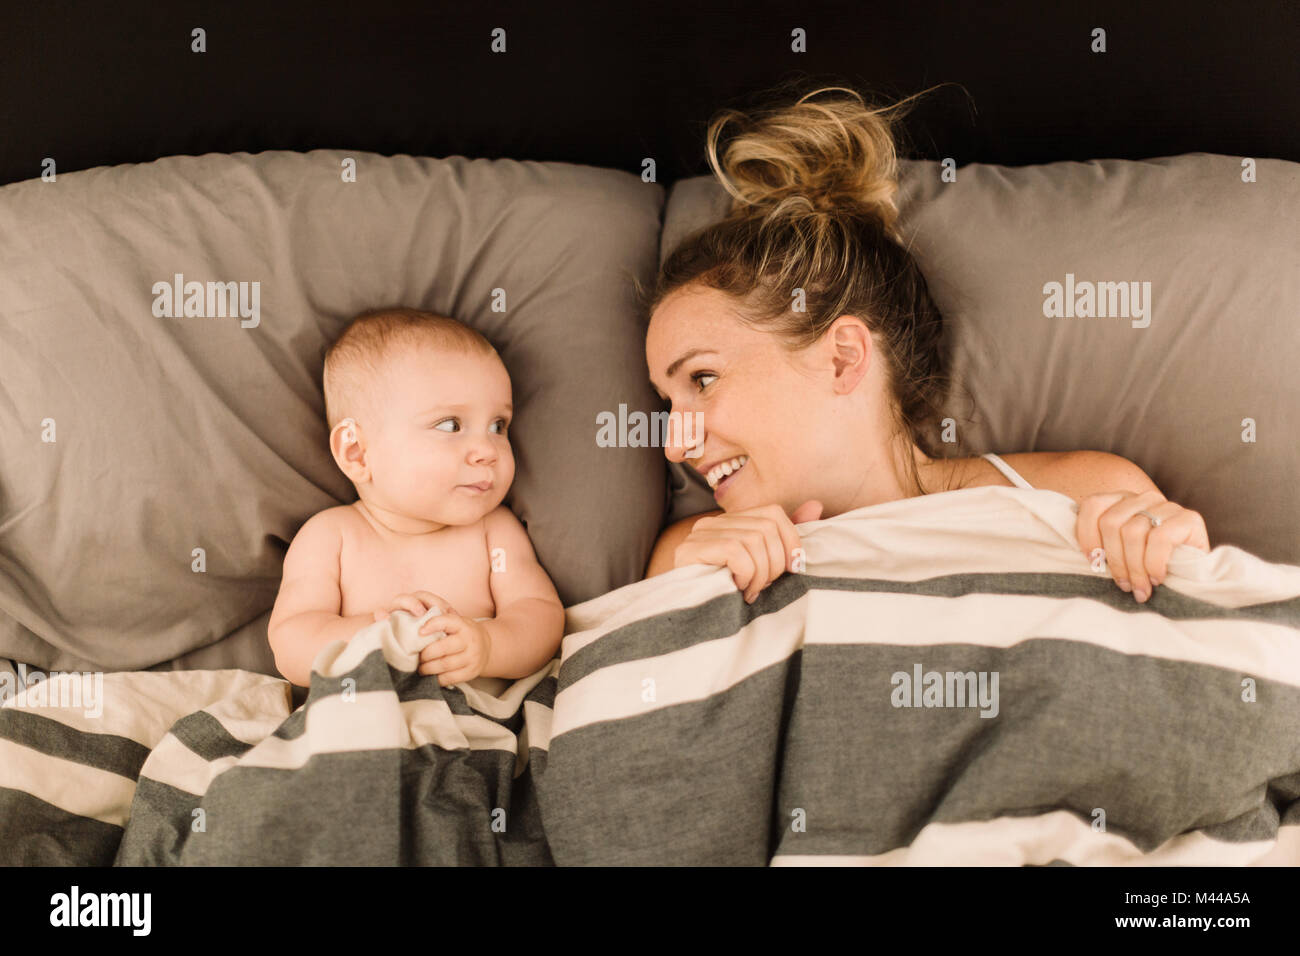 Woman lying in bed under duvet with baby daughter, overhead view Stock Photo